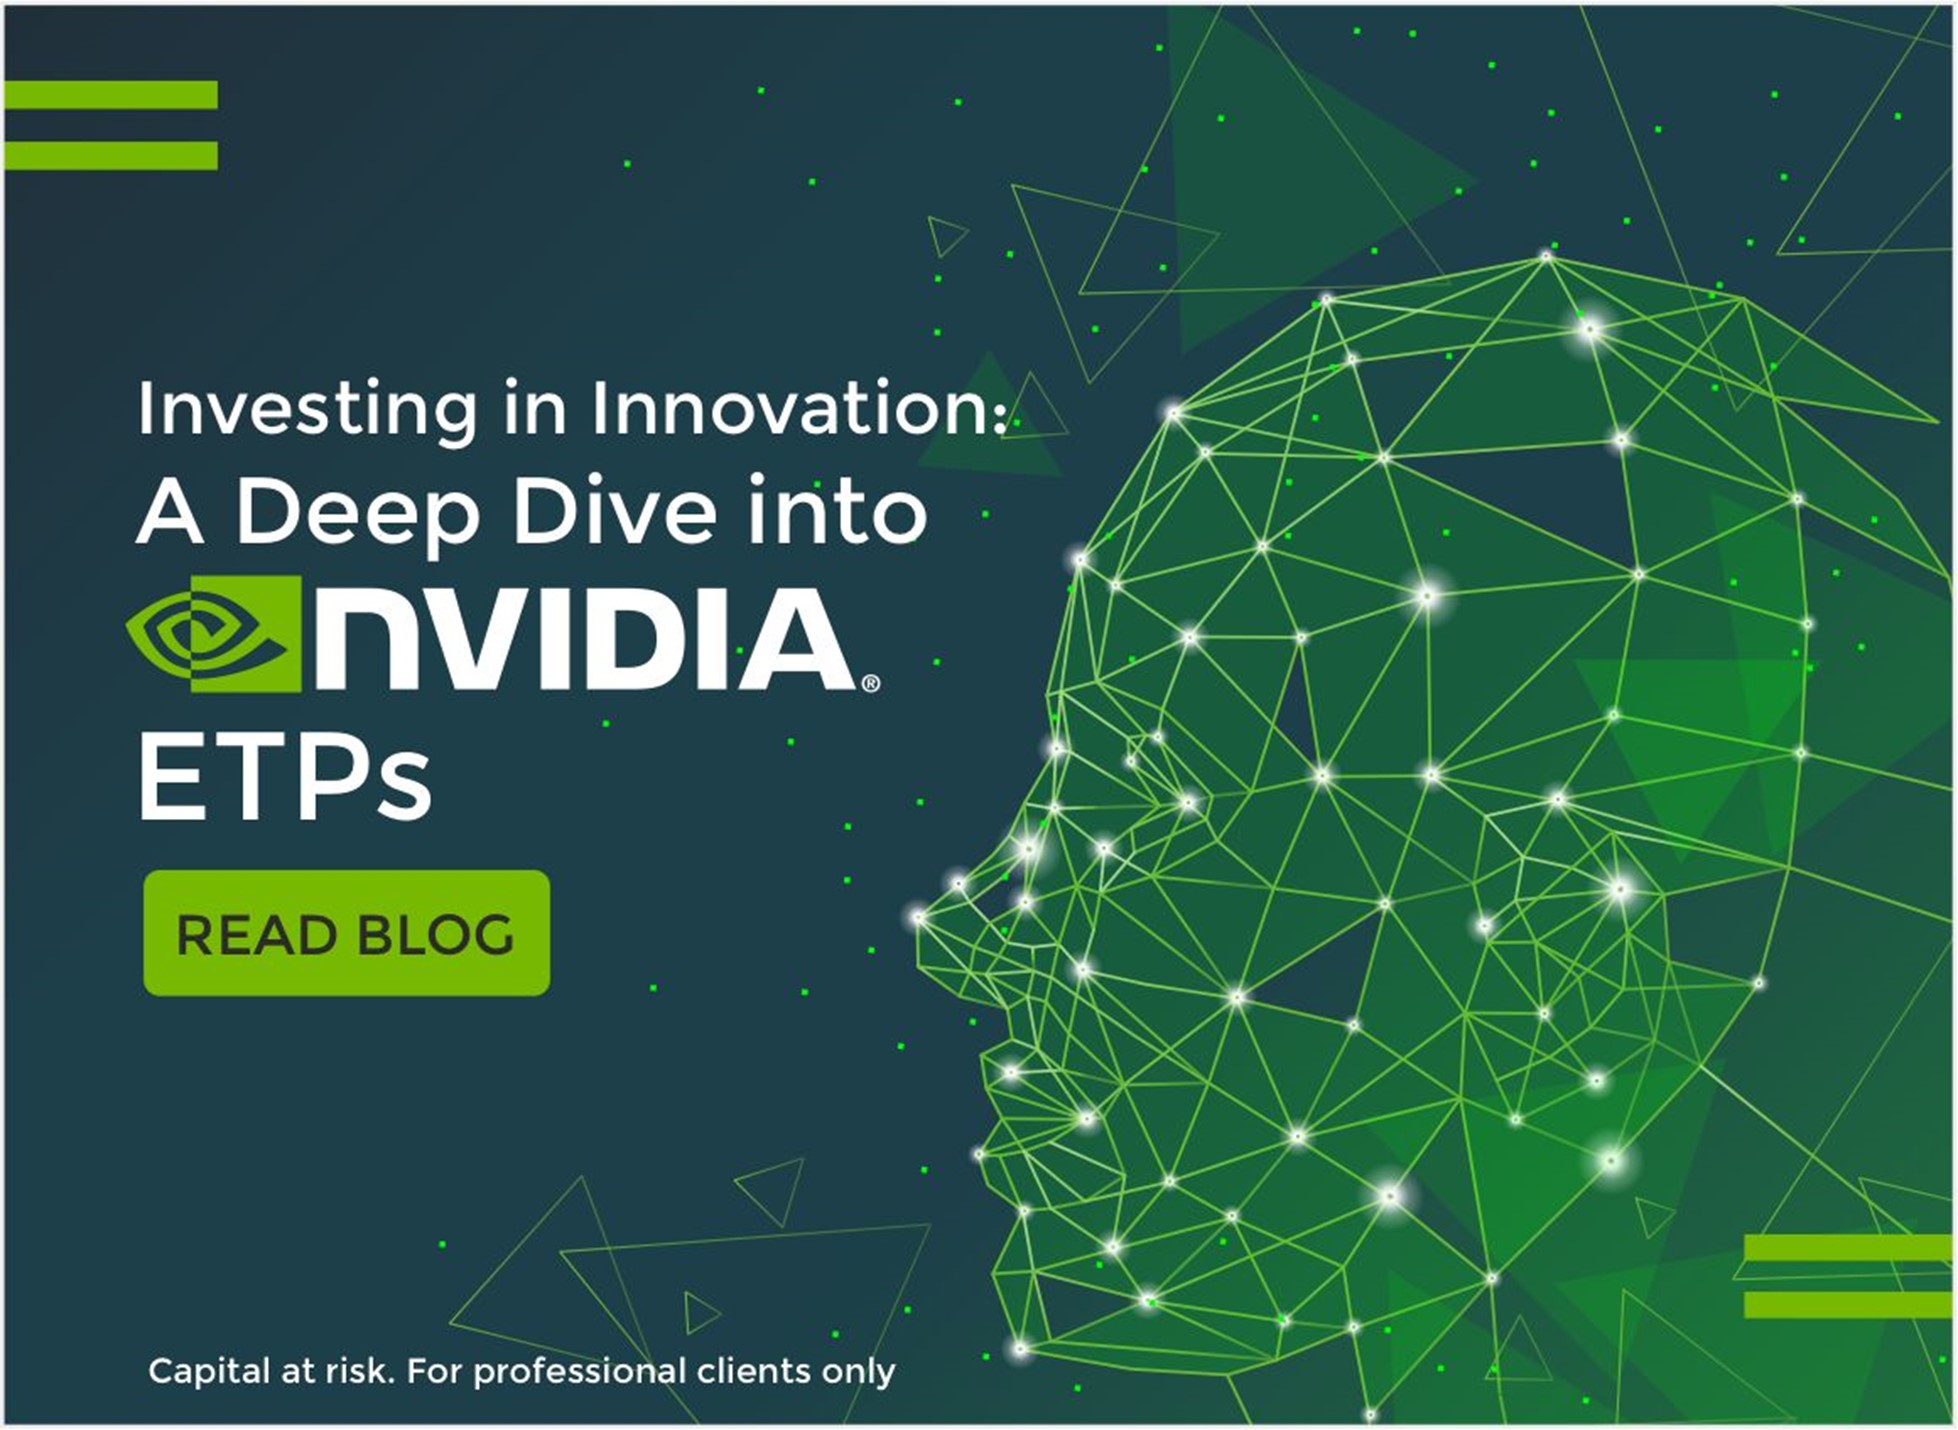 Investing in Innovation: A Deep Dive into NVIDIA ETPs